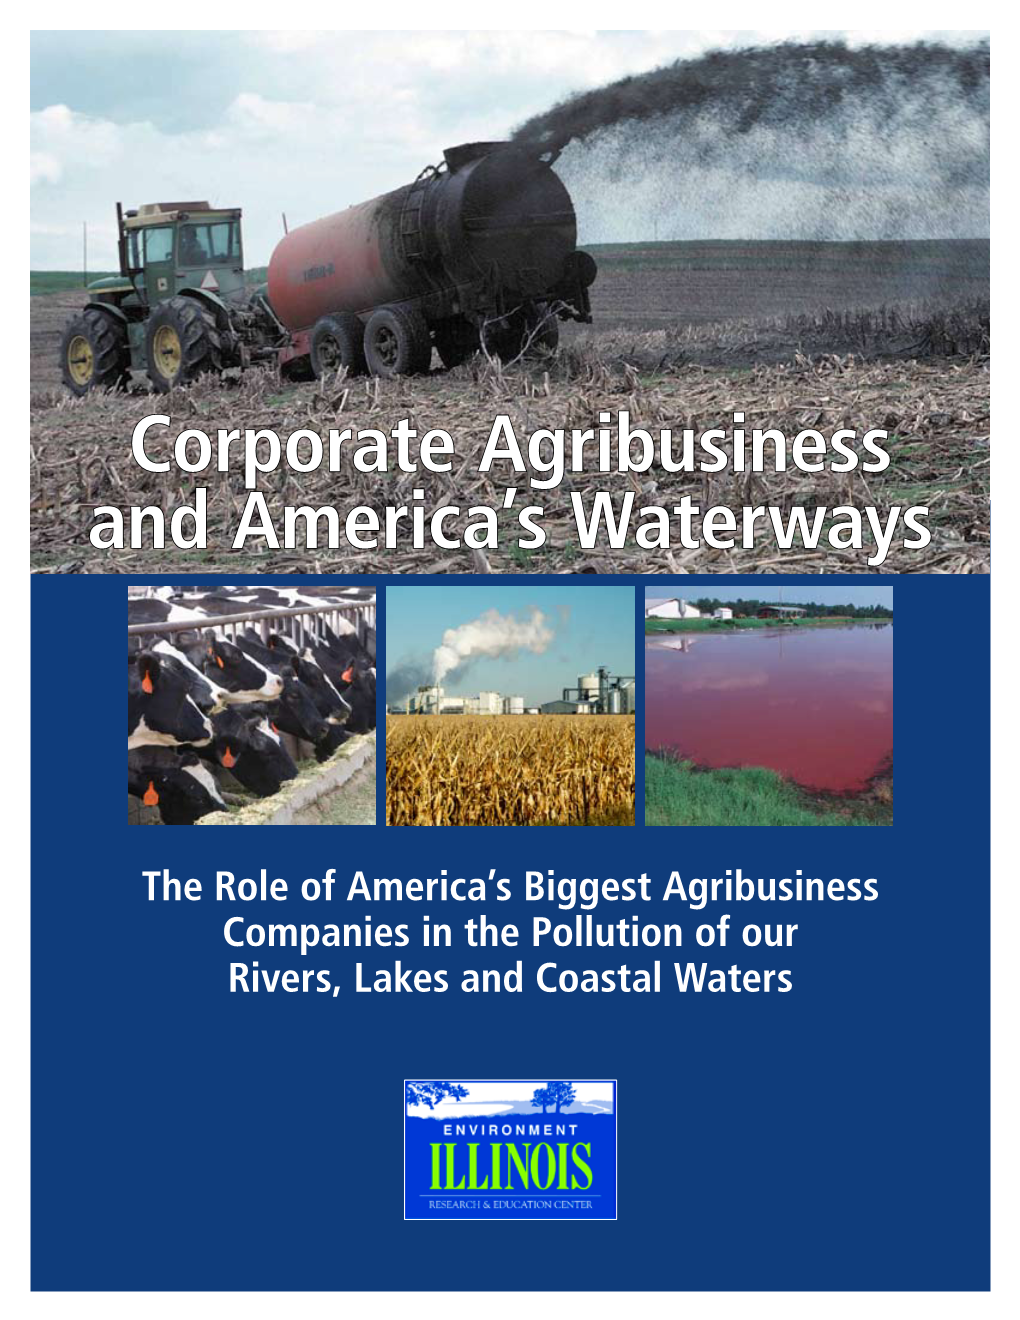 Corporate Agribusiness and America's Waterways